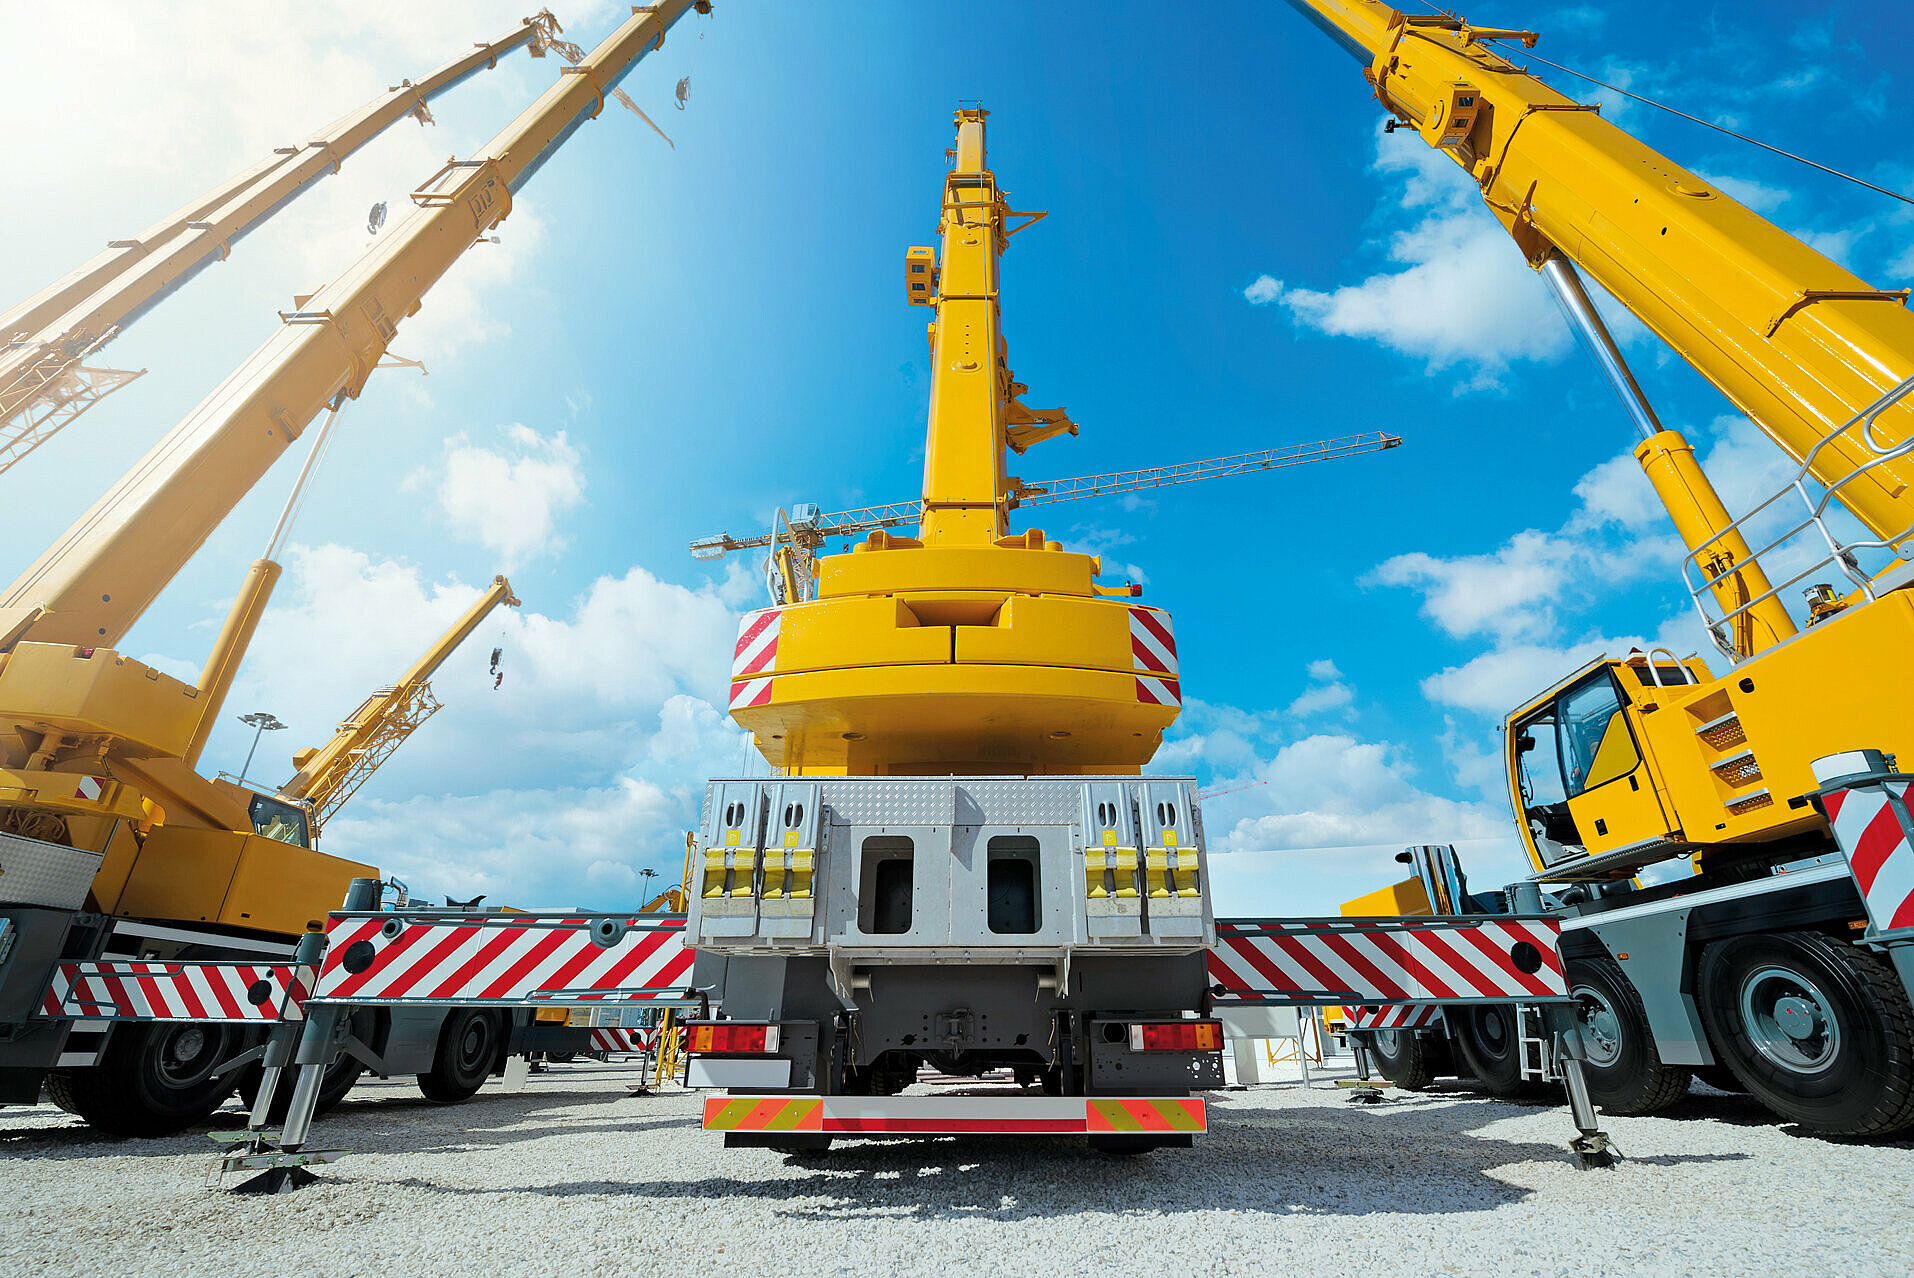 Rear view of three yellow mobile cranes